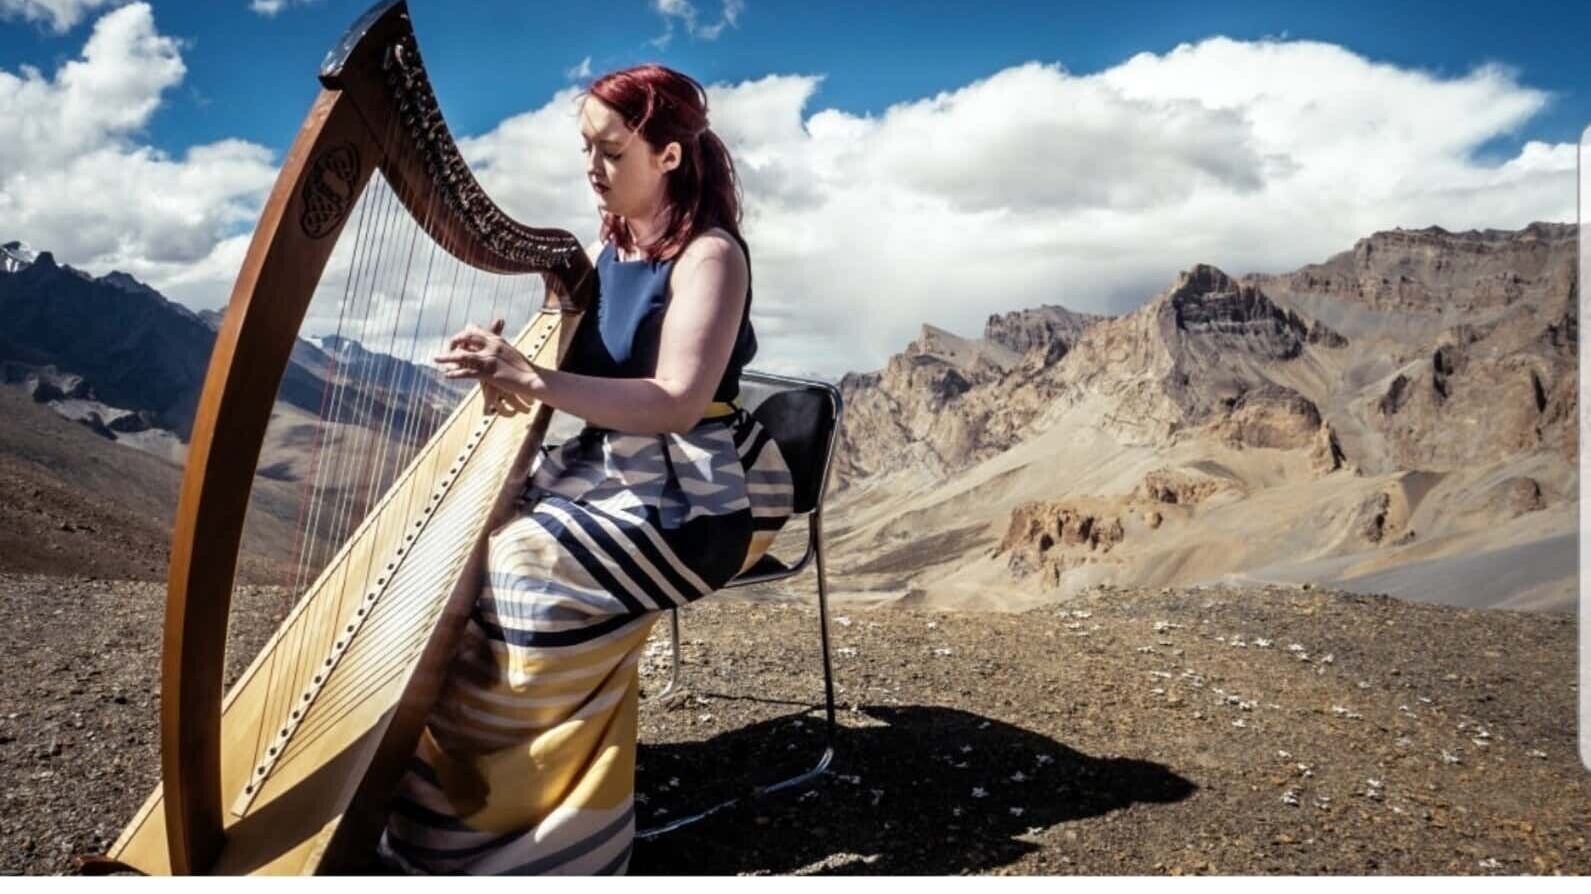 Siobhan Brady hopes to break a GWR she set in 2018 for the highest altitude harp performance.